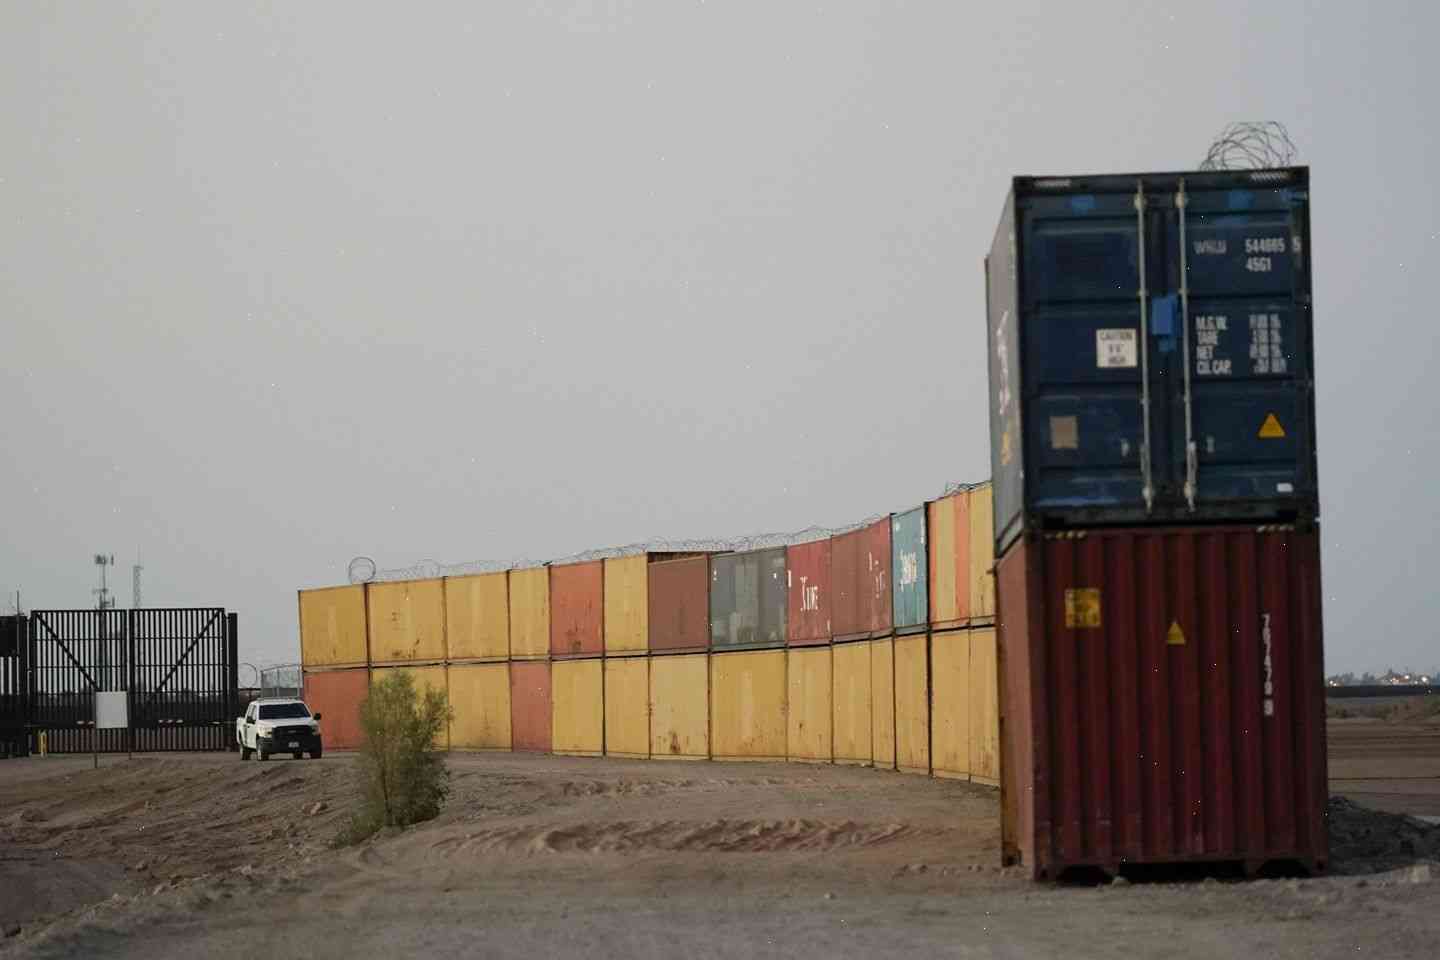 Michigan rejects request to remove shipping containers